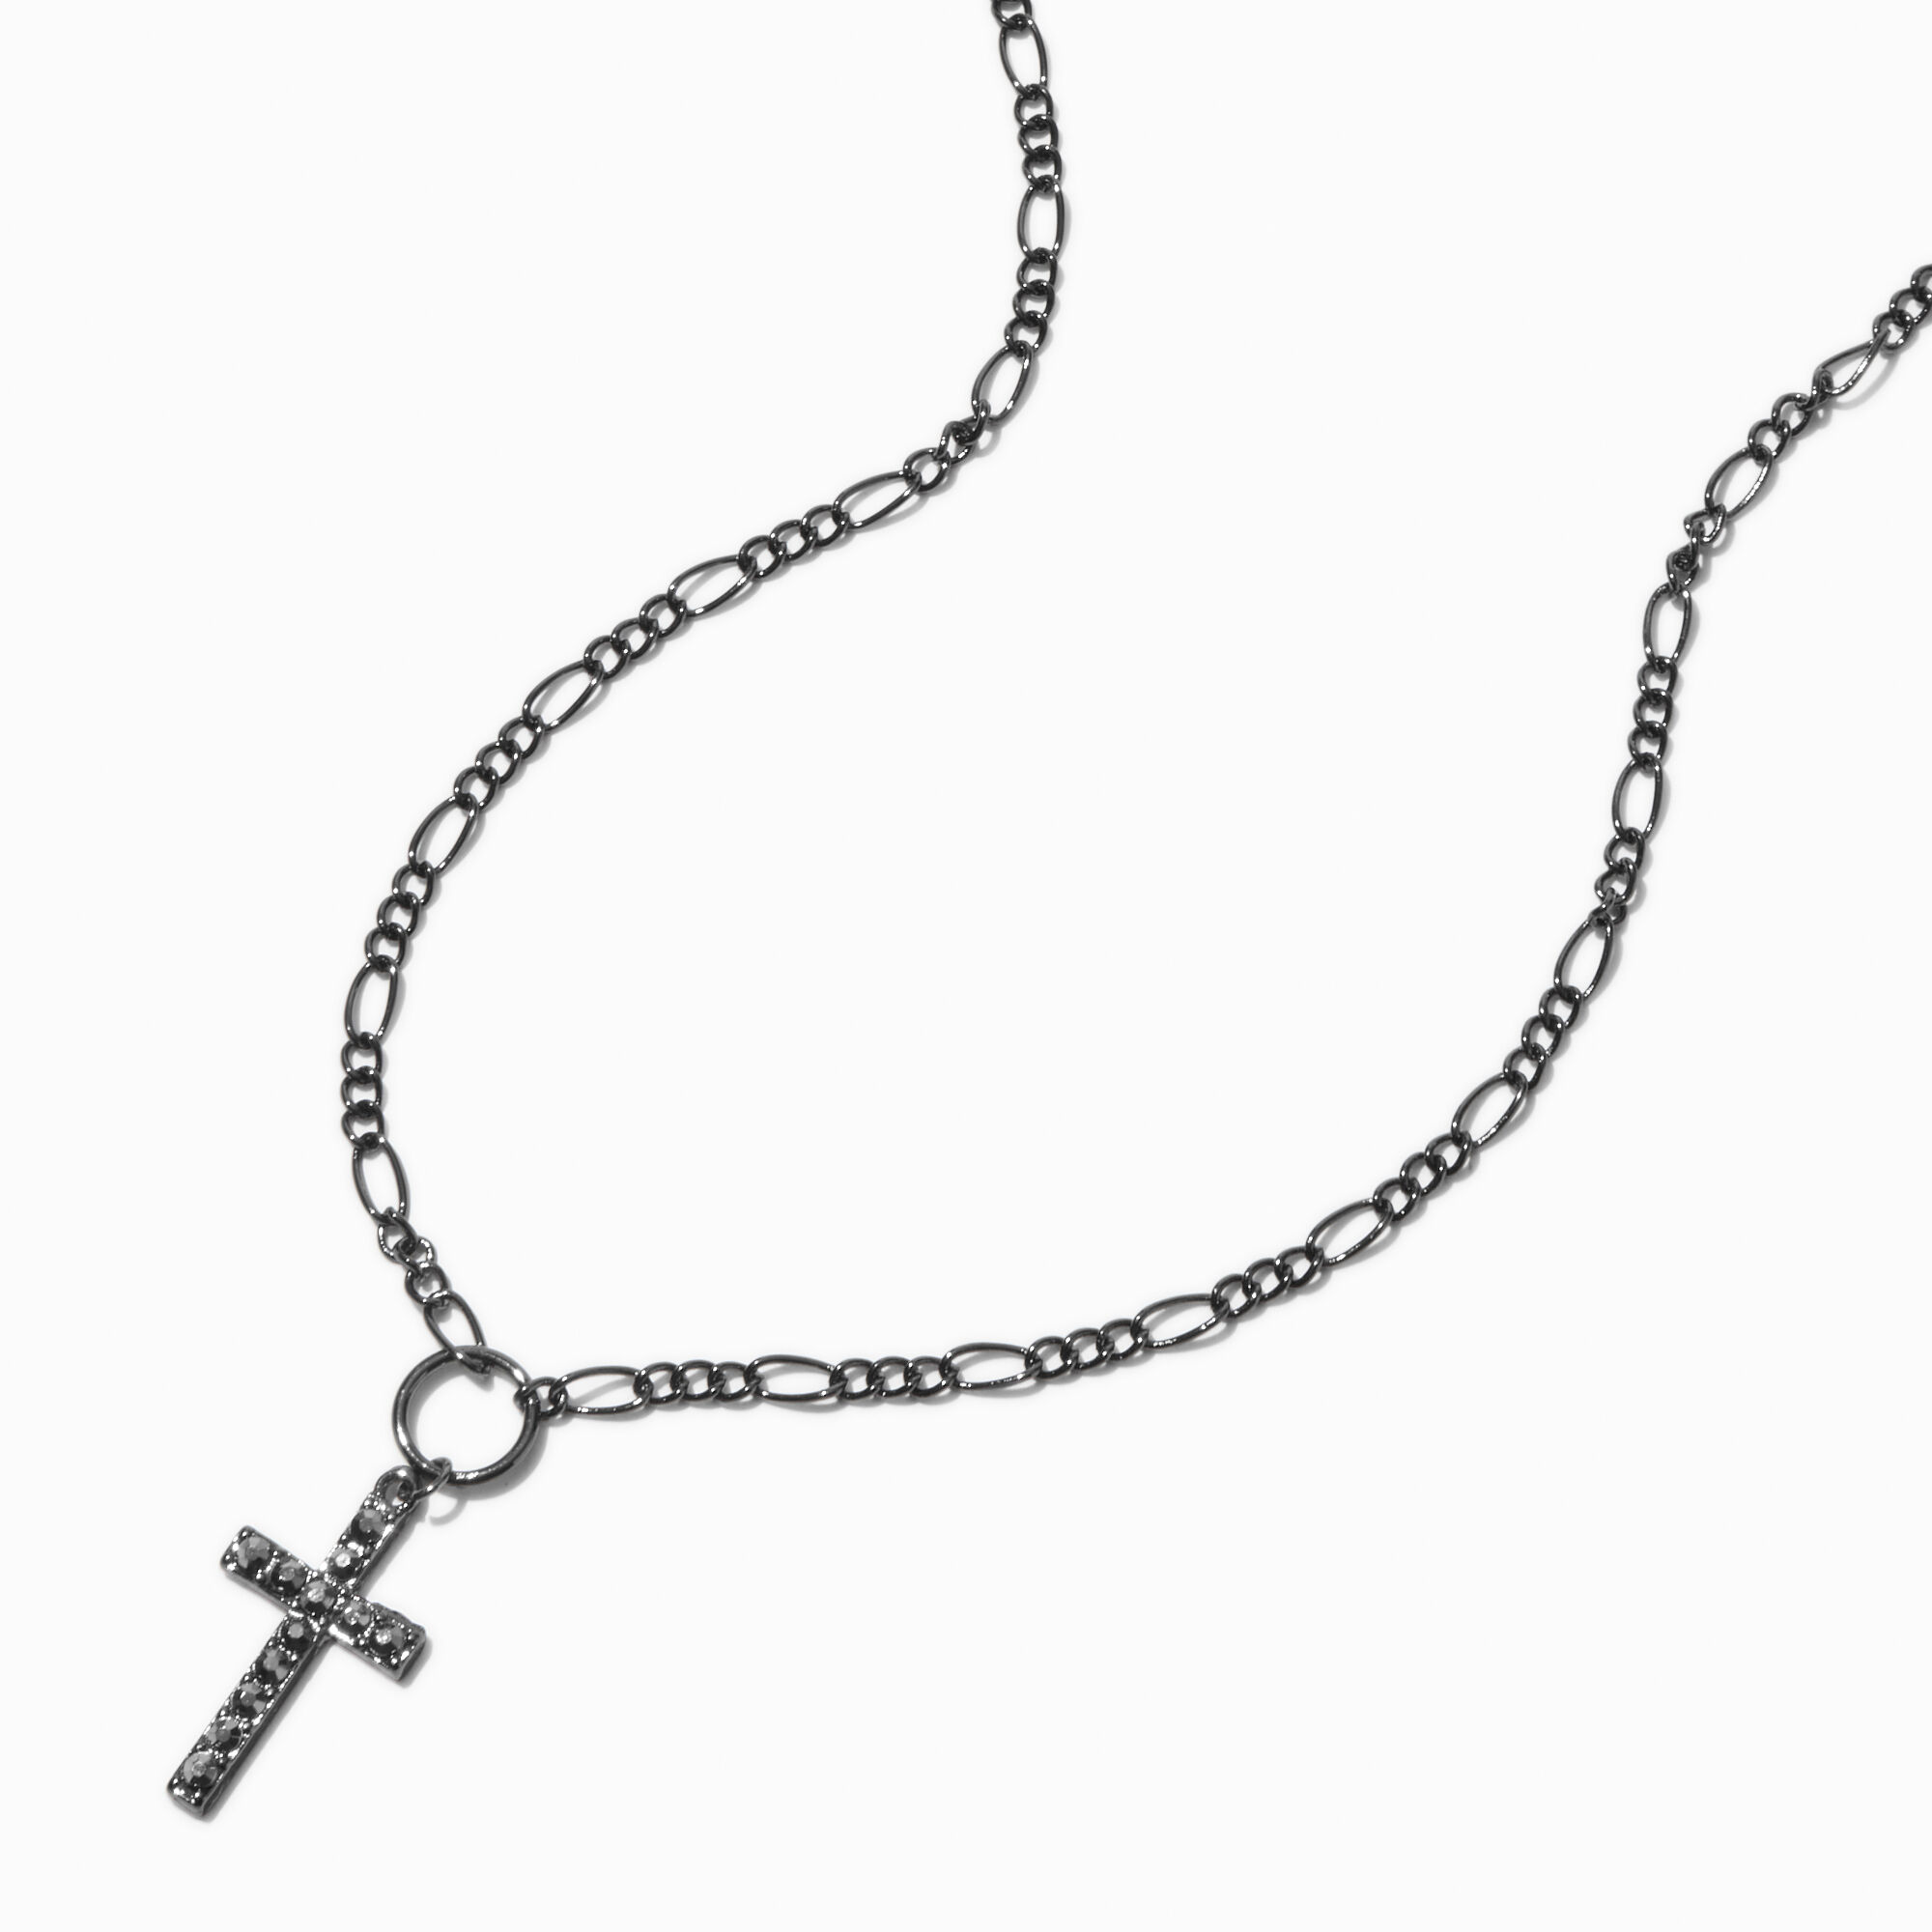 View Claires Hematite Embellished Cross Pendant Necklace Black information